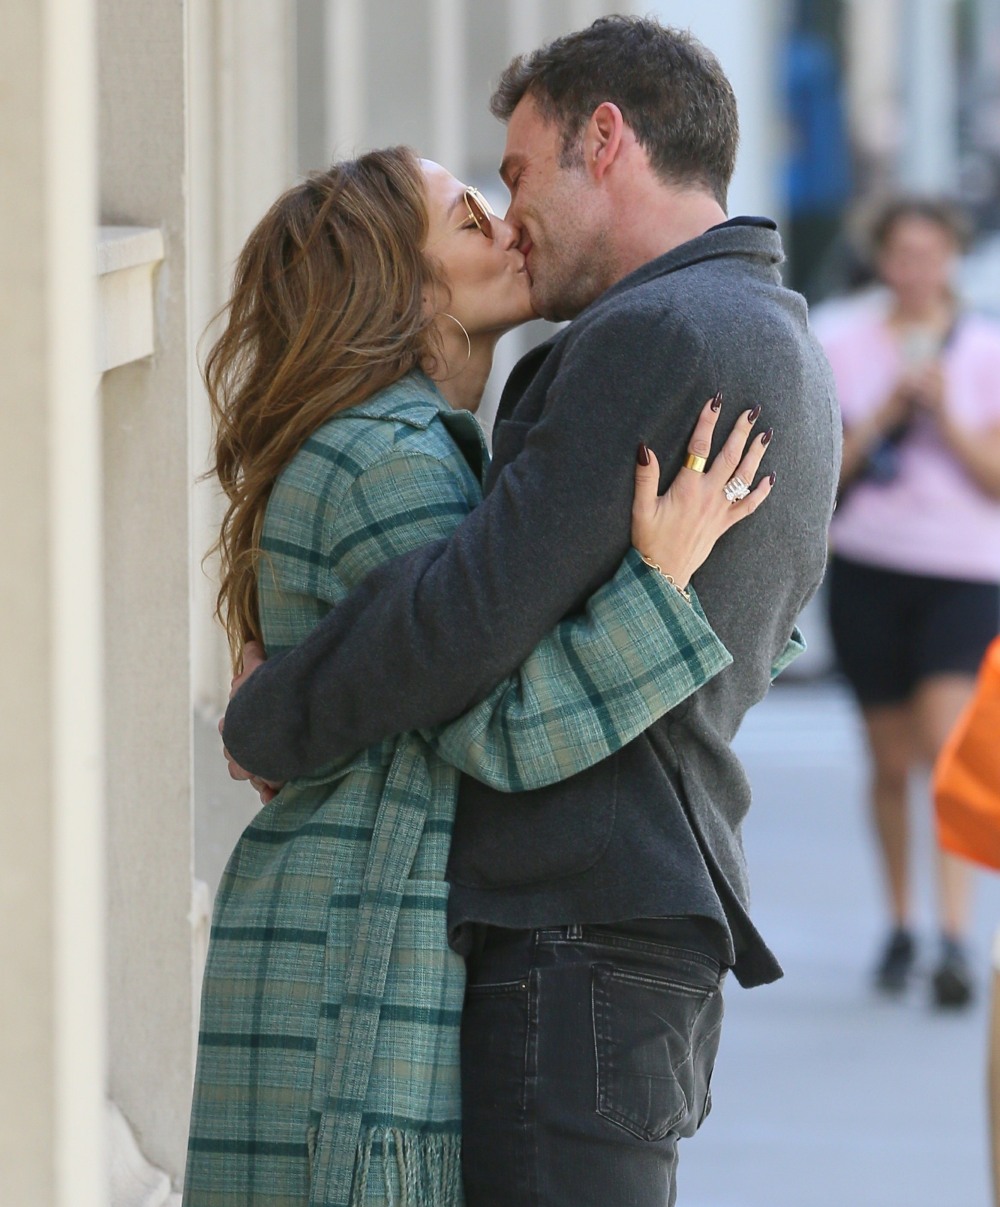 Jennifer Lopez and Ben Affleck kiss in New York City before flying out